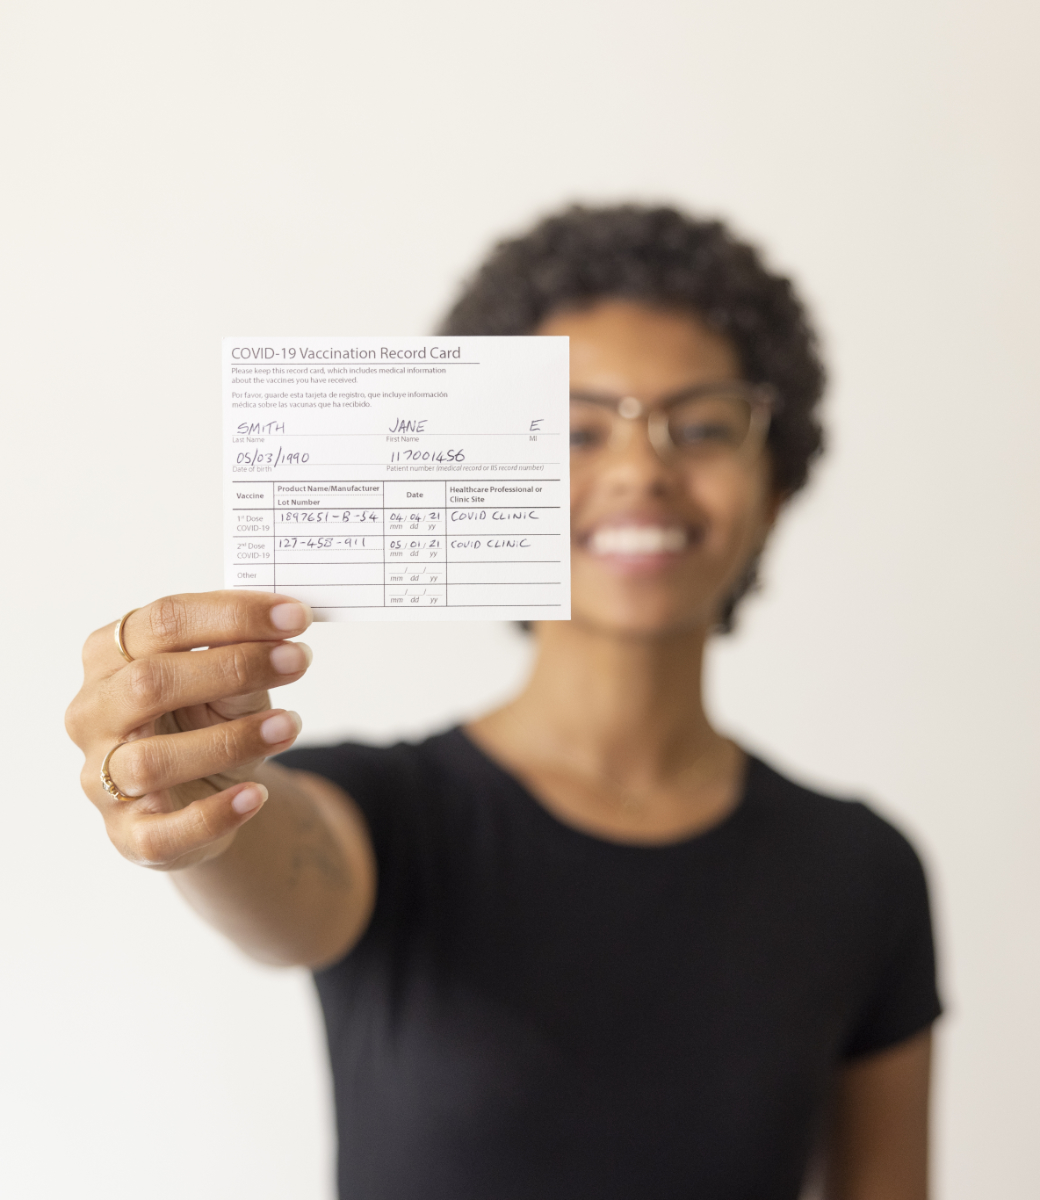 out of focus smiling woman extends her arm holding vaccination record card